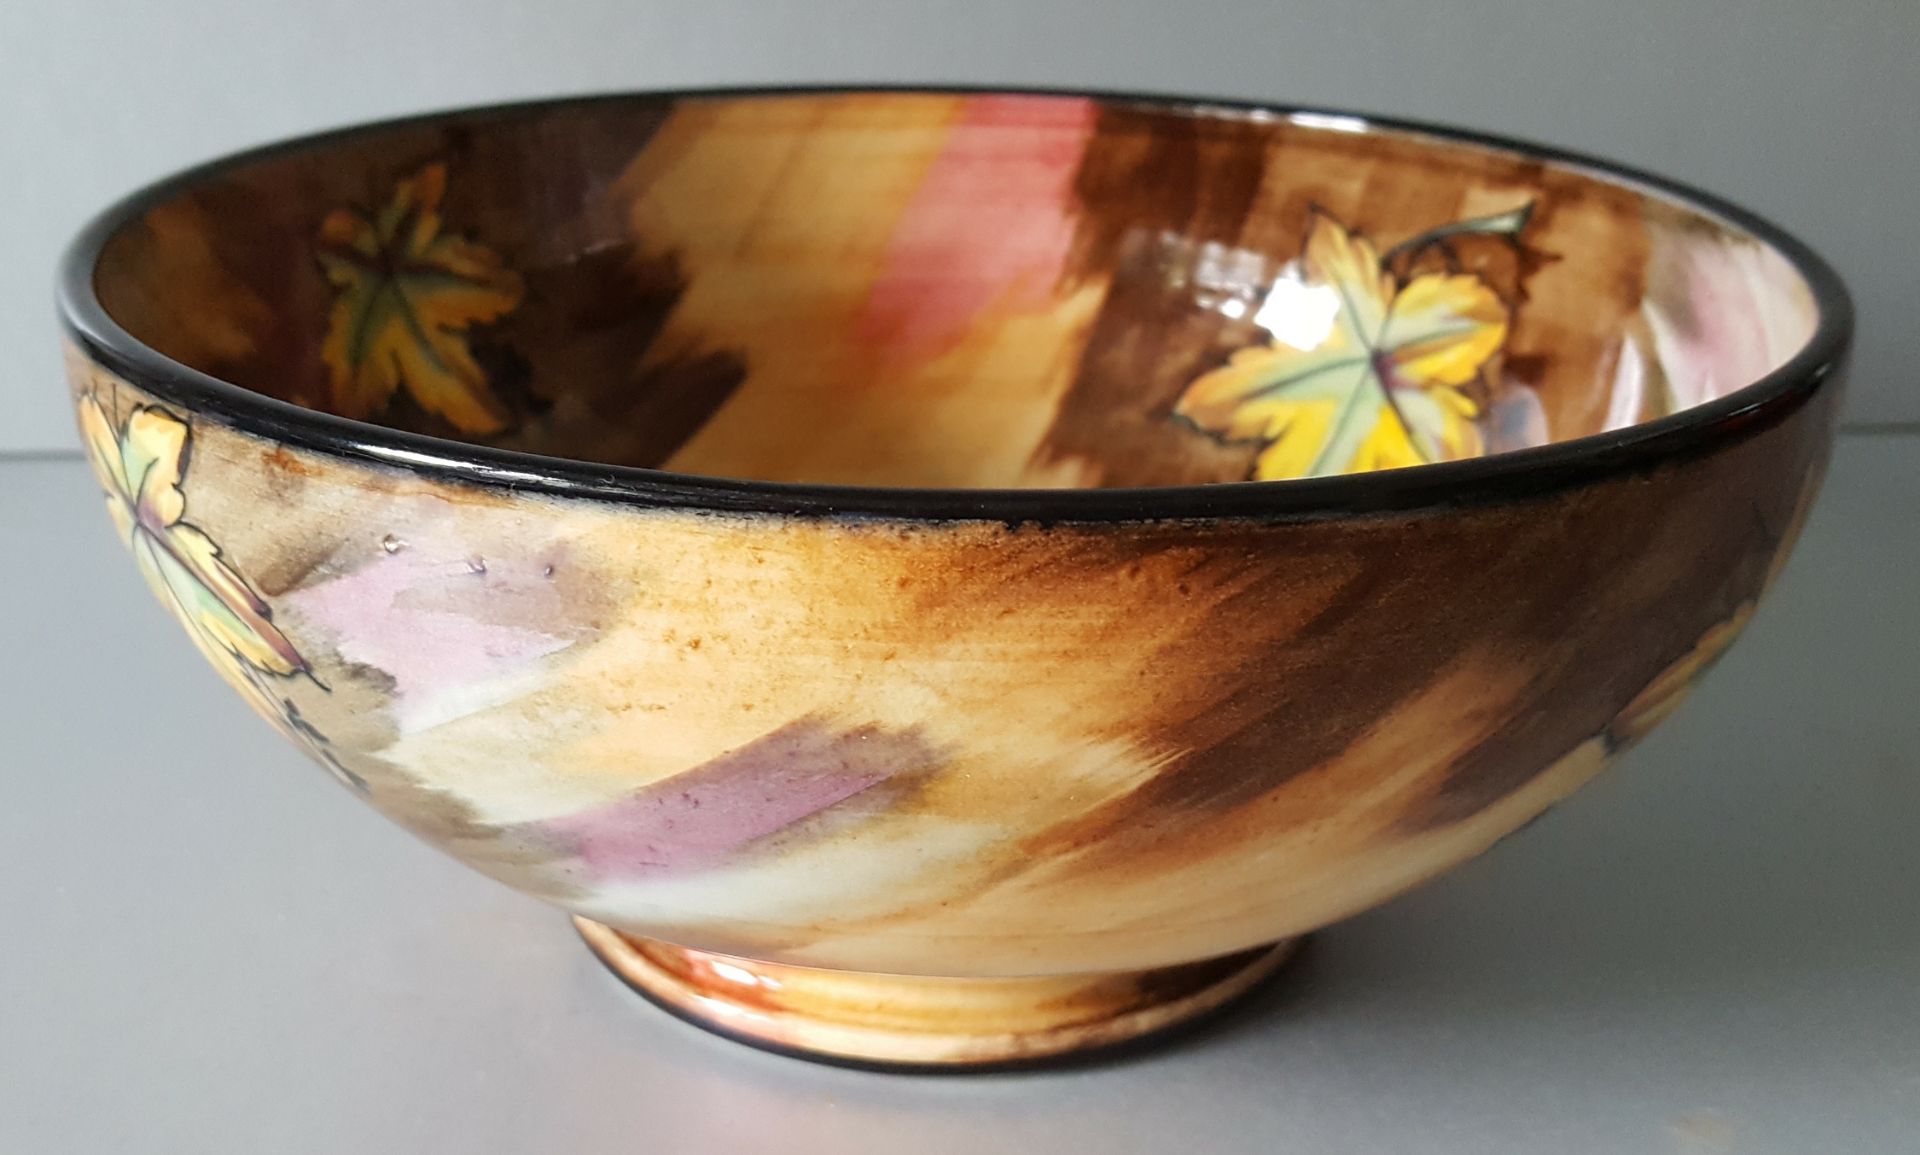 Vintage Retro H & K Tunstall Pottery Bowl Autumn Tints Hand Painted Early 20th Century - Image 2 of 3